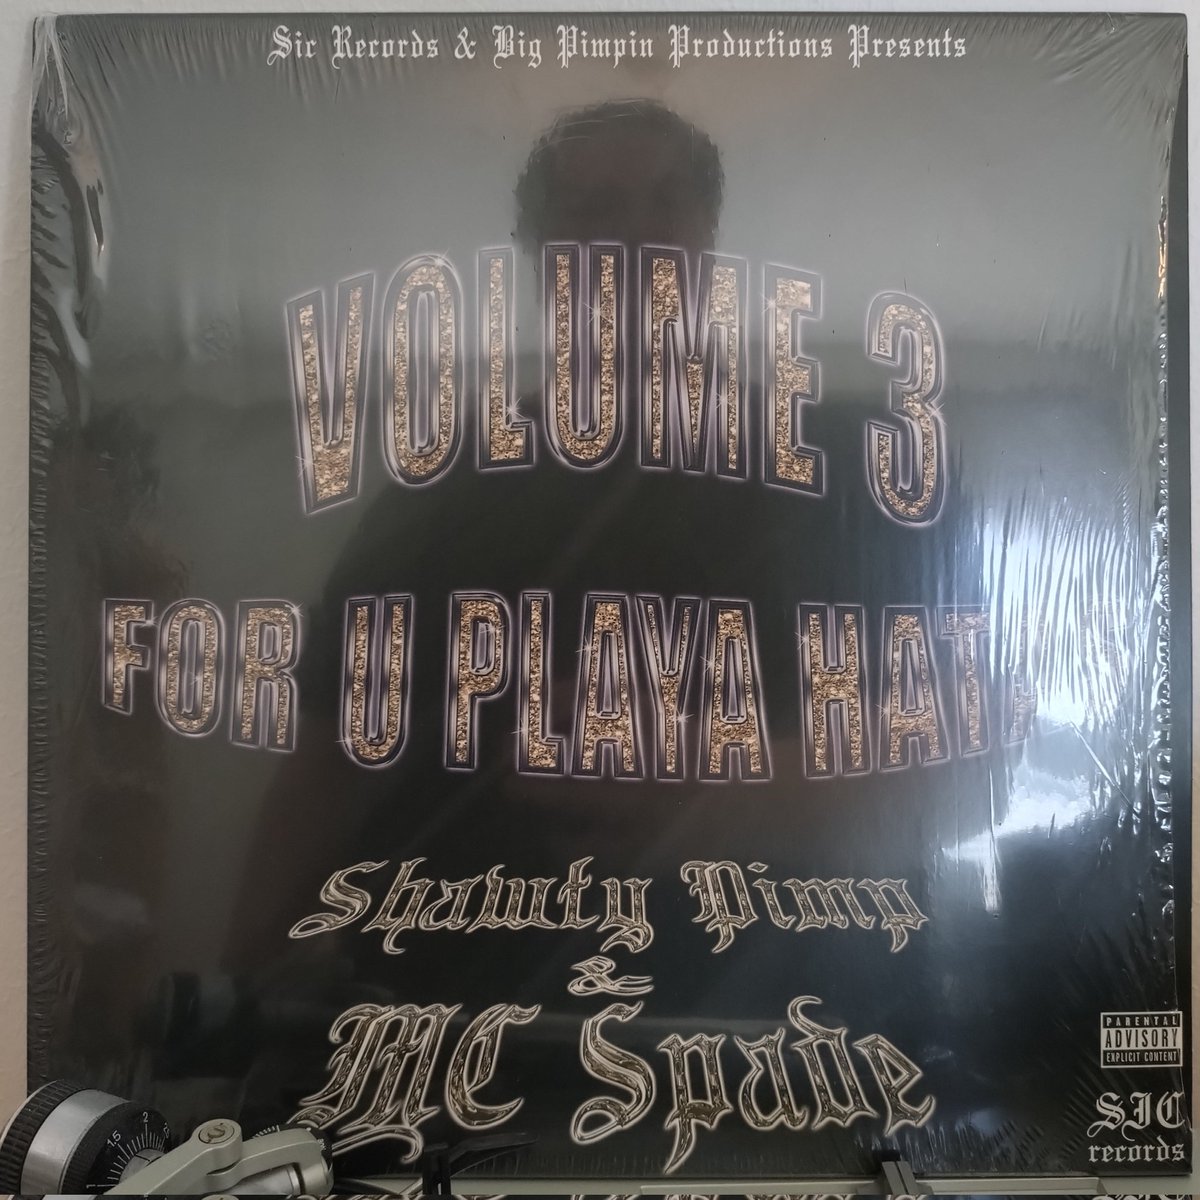 Listening through my record collection, day 147.

Shawty Pimp & MC Spade, Memphis, Tennessee.

#vinylcollection #90sHipHop #MemphisRap